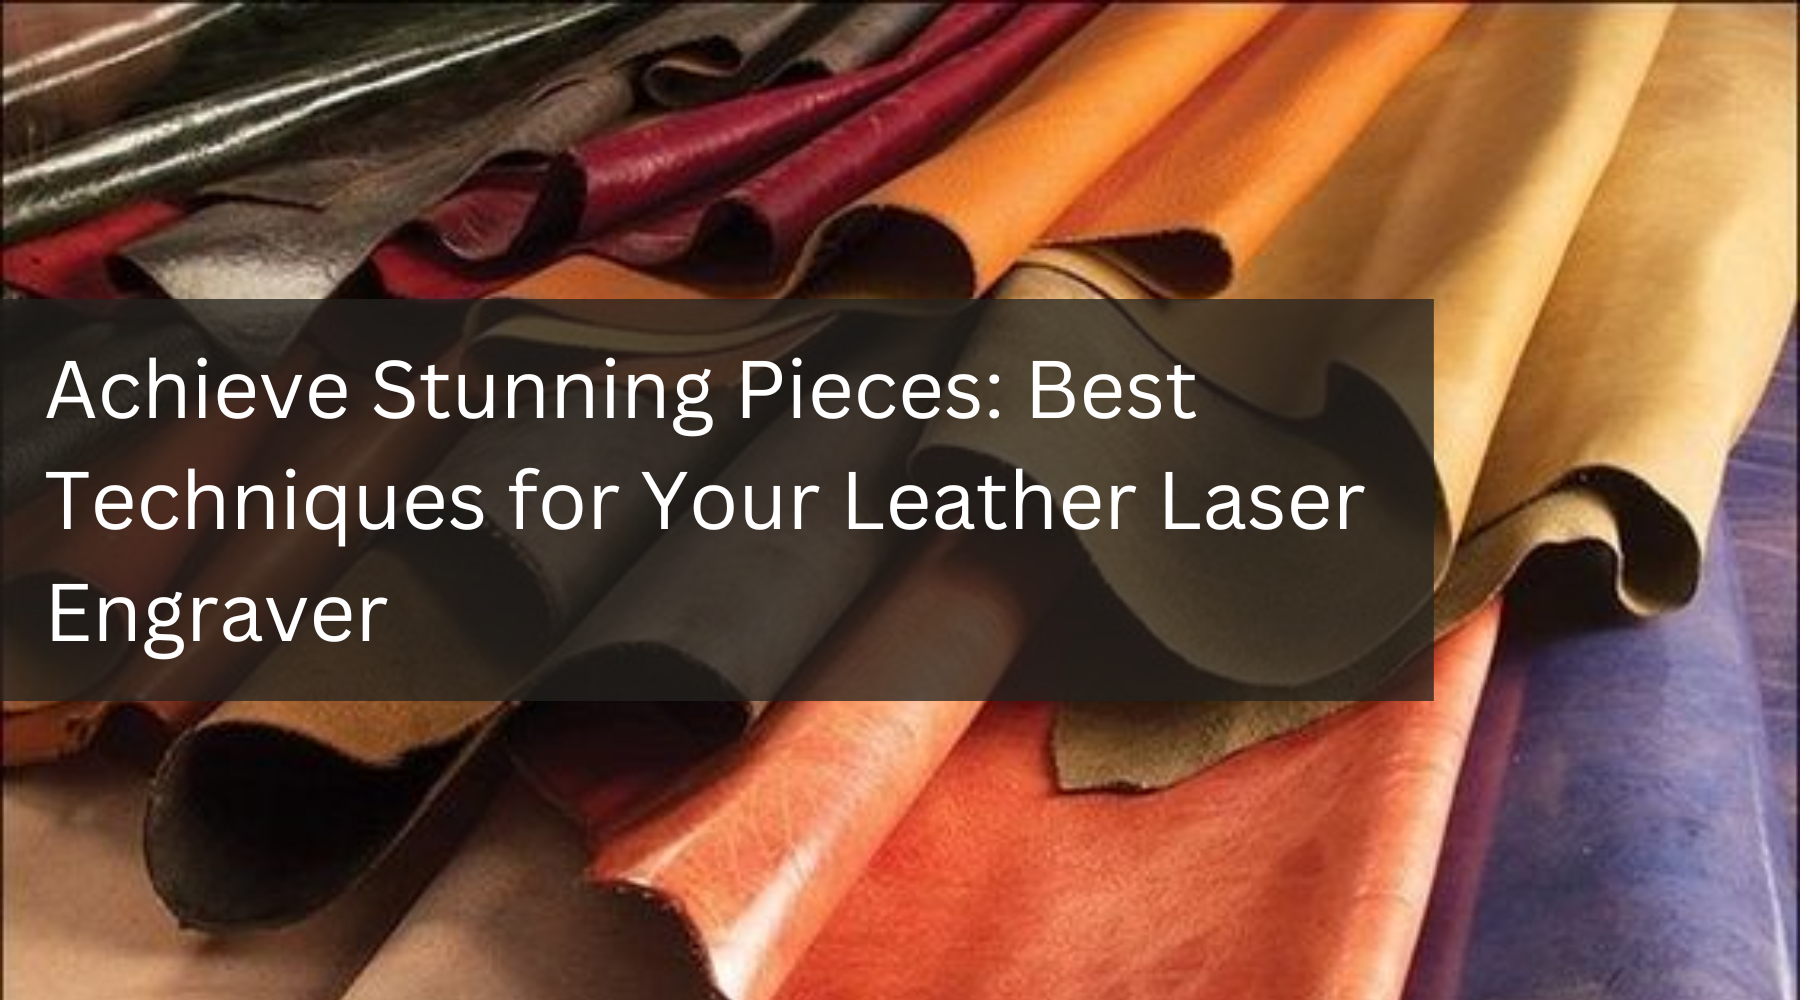 Achieve Stunning Pieces: Best Techniques for Your Leather Laser Engraver